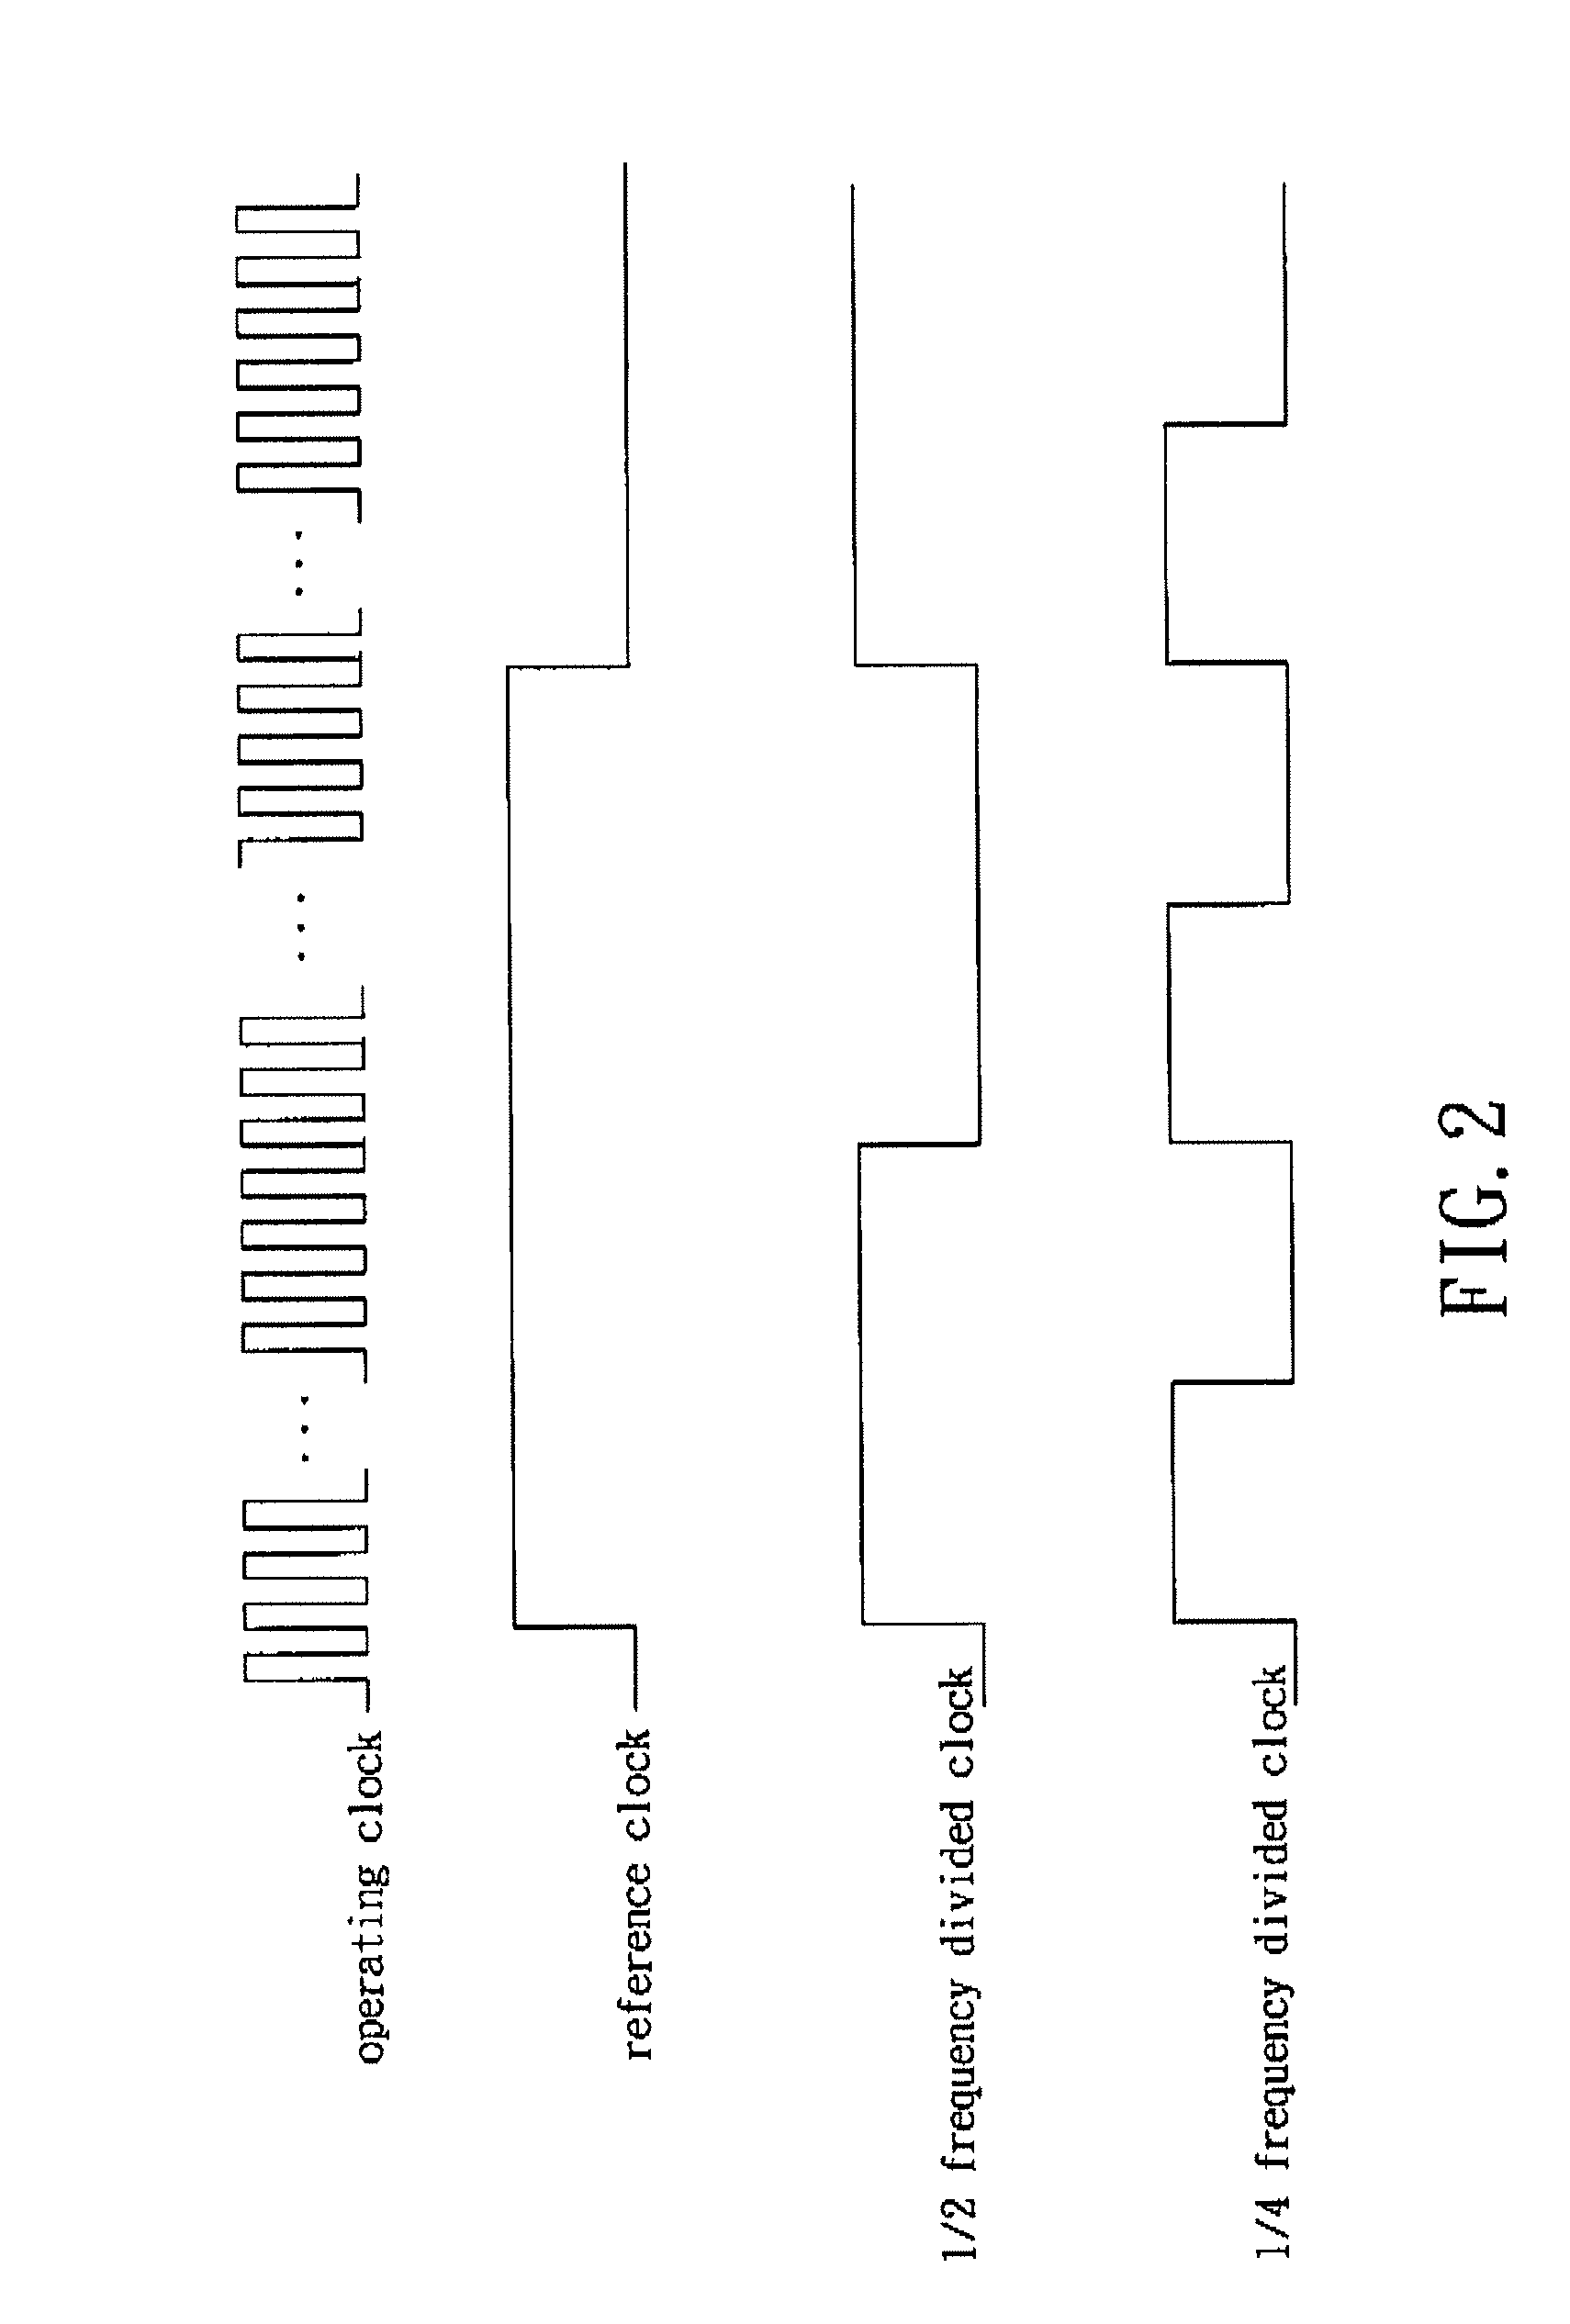 Signal receiving device and frequency determining circuit